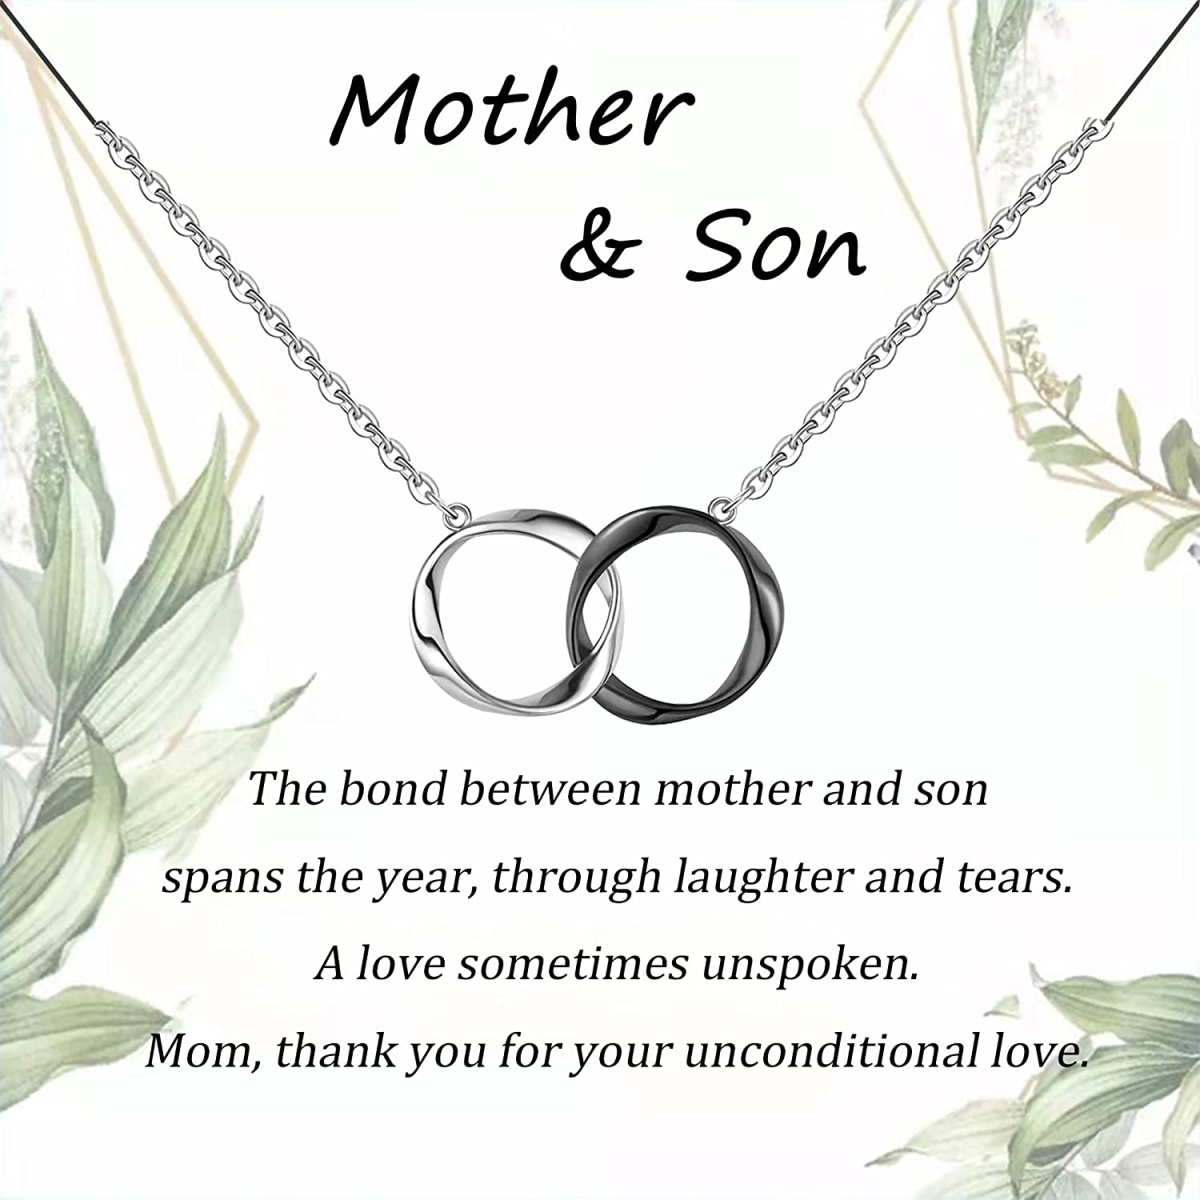 Gifts for Mom - Mother and Son Necklace - Boy Mom Gift - Love Knot Charm -  Infinite Love Jewelry - Sterling Silver - Adjustable Length - Walmart.com